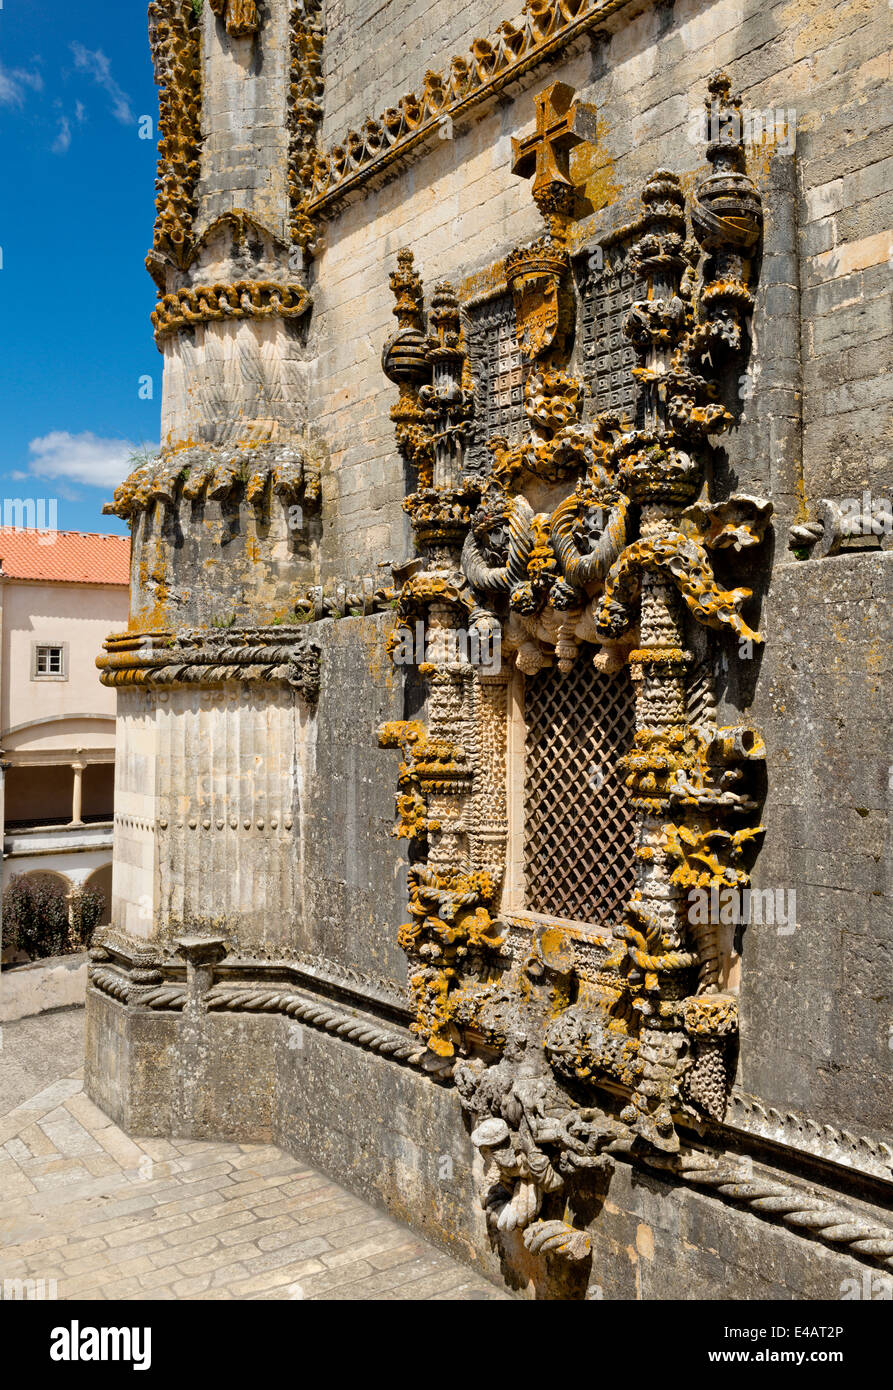 Central Portugal, the Ribatejo, Tomar, the manueline chapter house window in the Convento de Cristo convent (the janela do Capítulo) Stock Photo